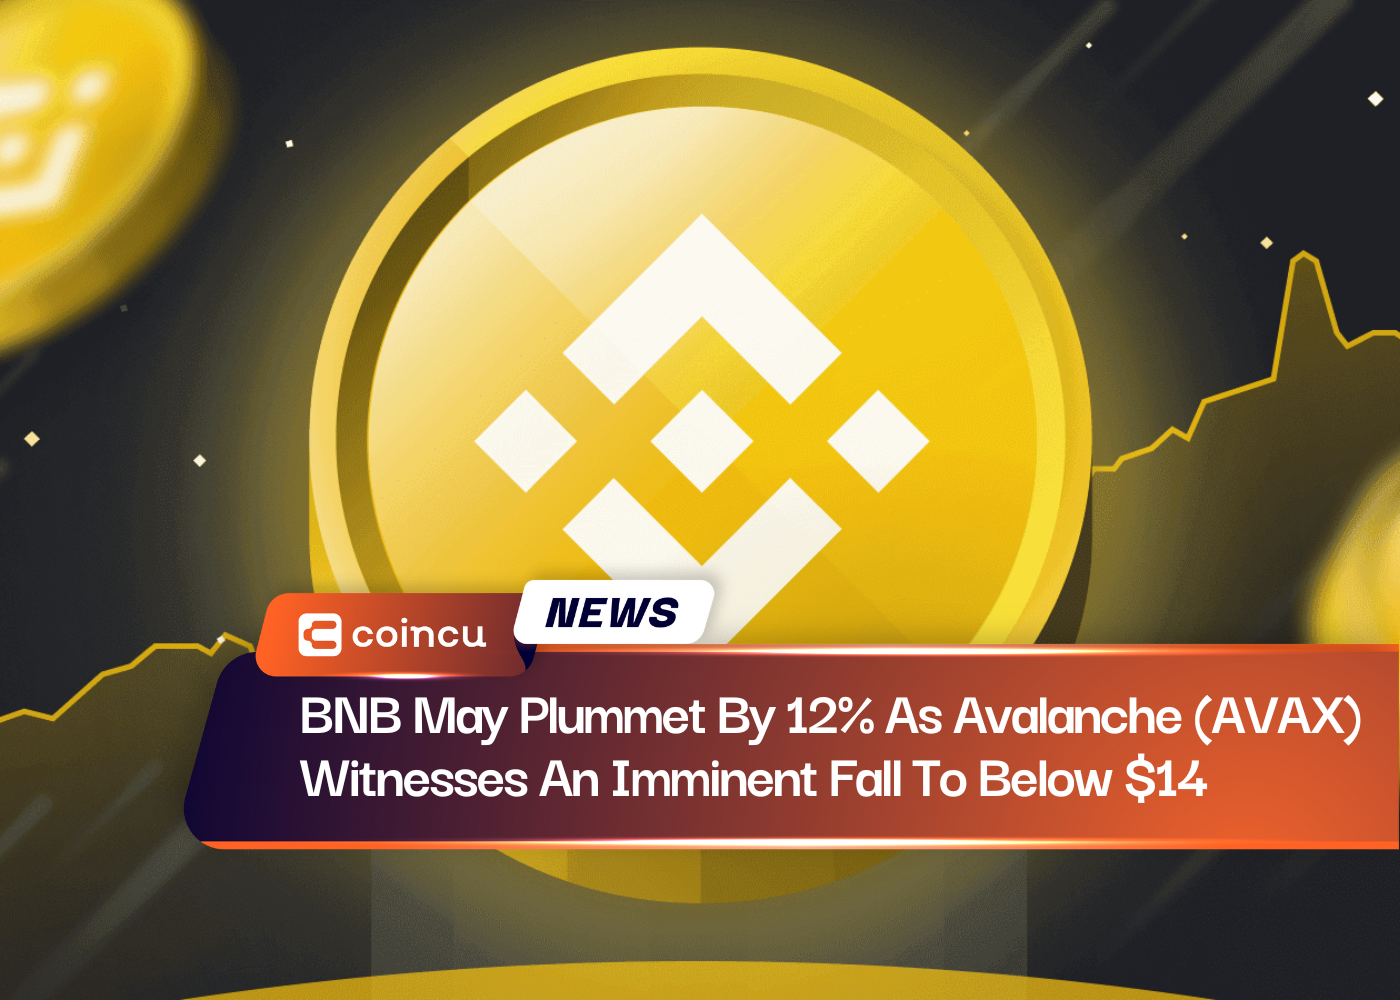 BNB May Plummet By 12% As Avalanche (AVAX) Witnesses An Imminent Fall To Below $14